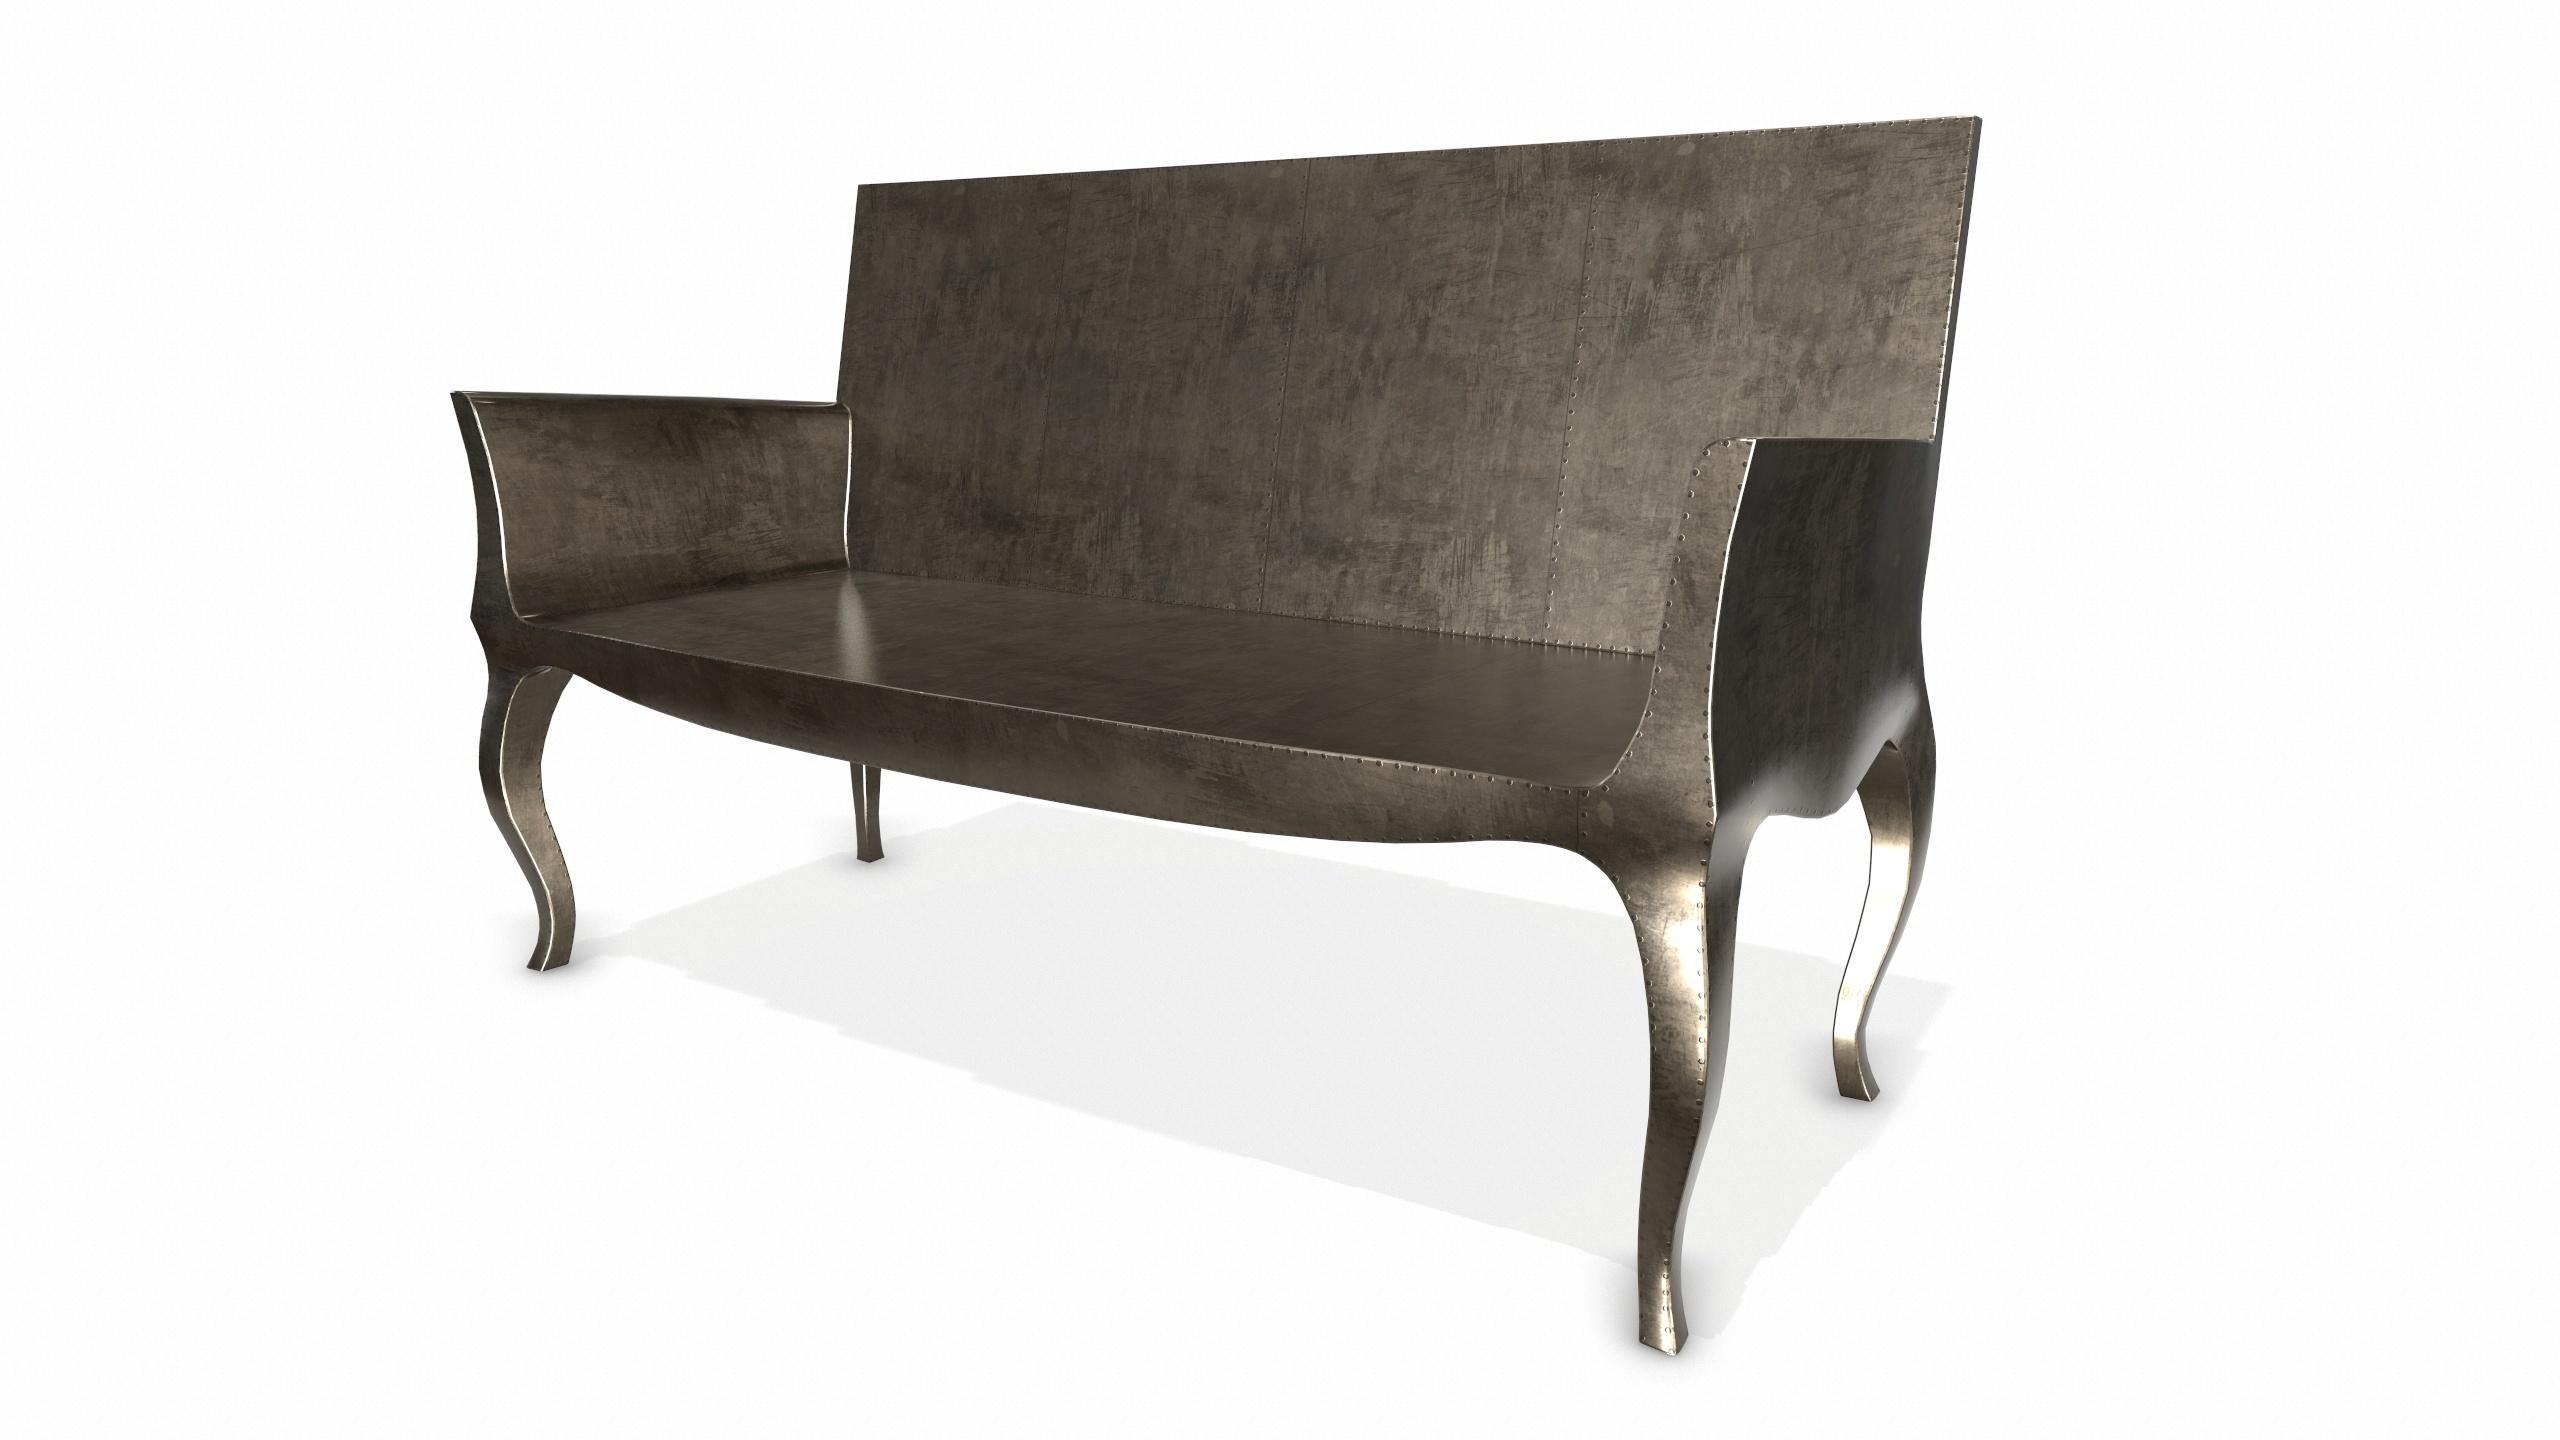 American Louise Settee Art Deco Daybeds in Smooth Antique Bronze by Paul Mathieu For Sale